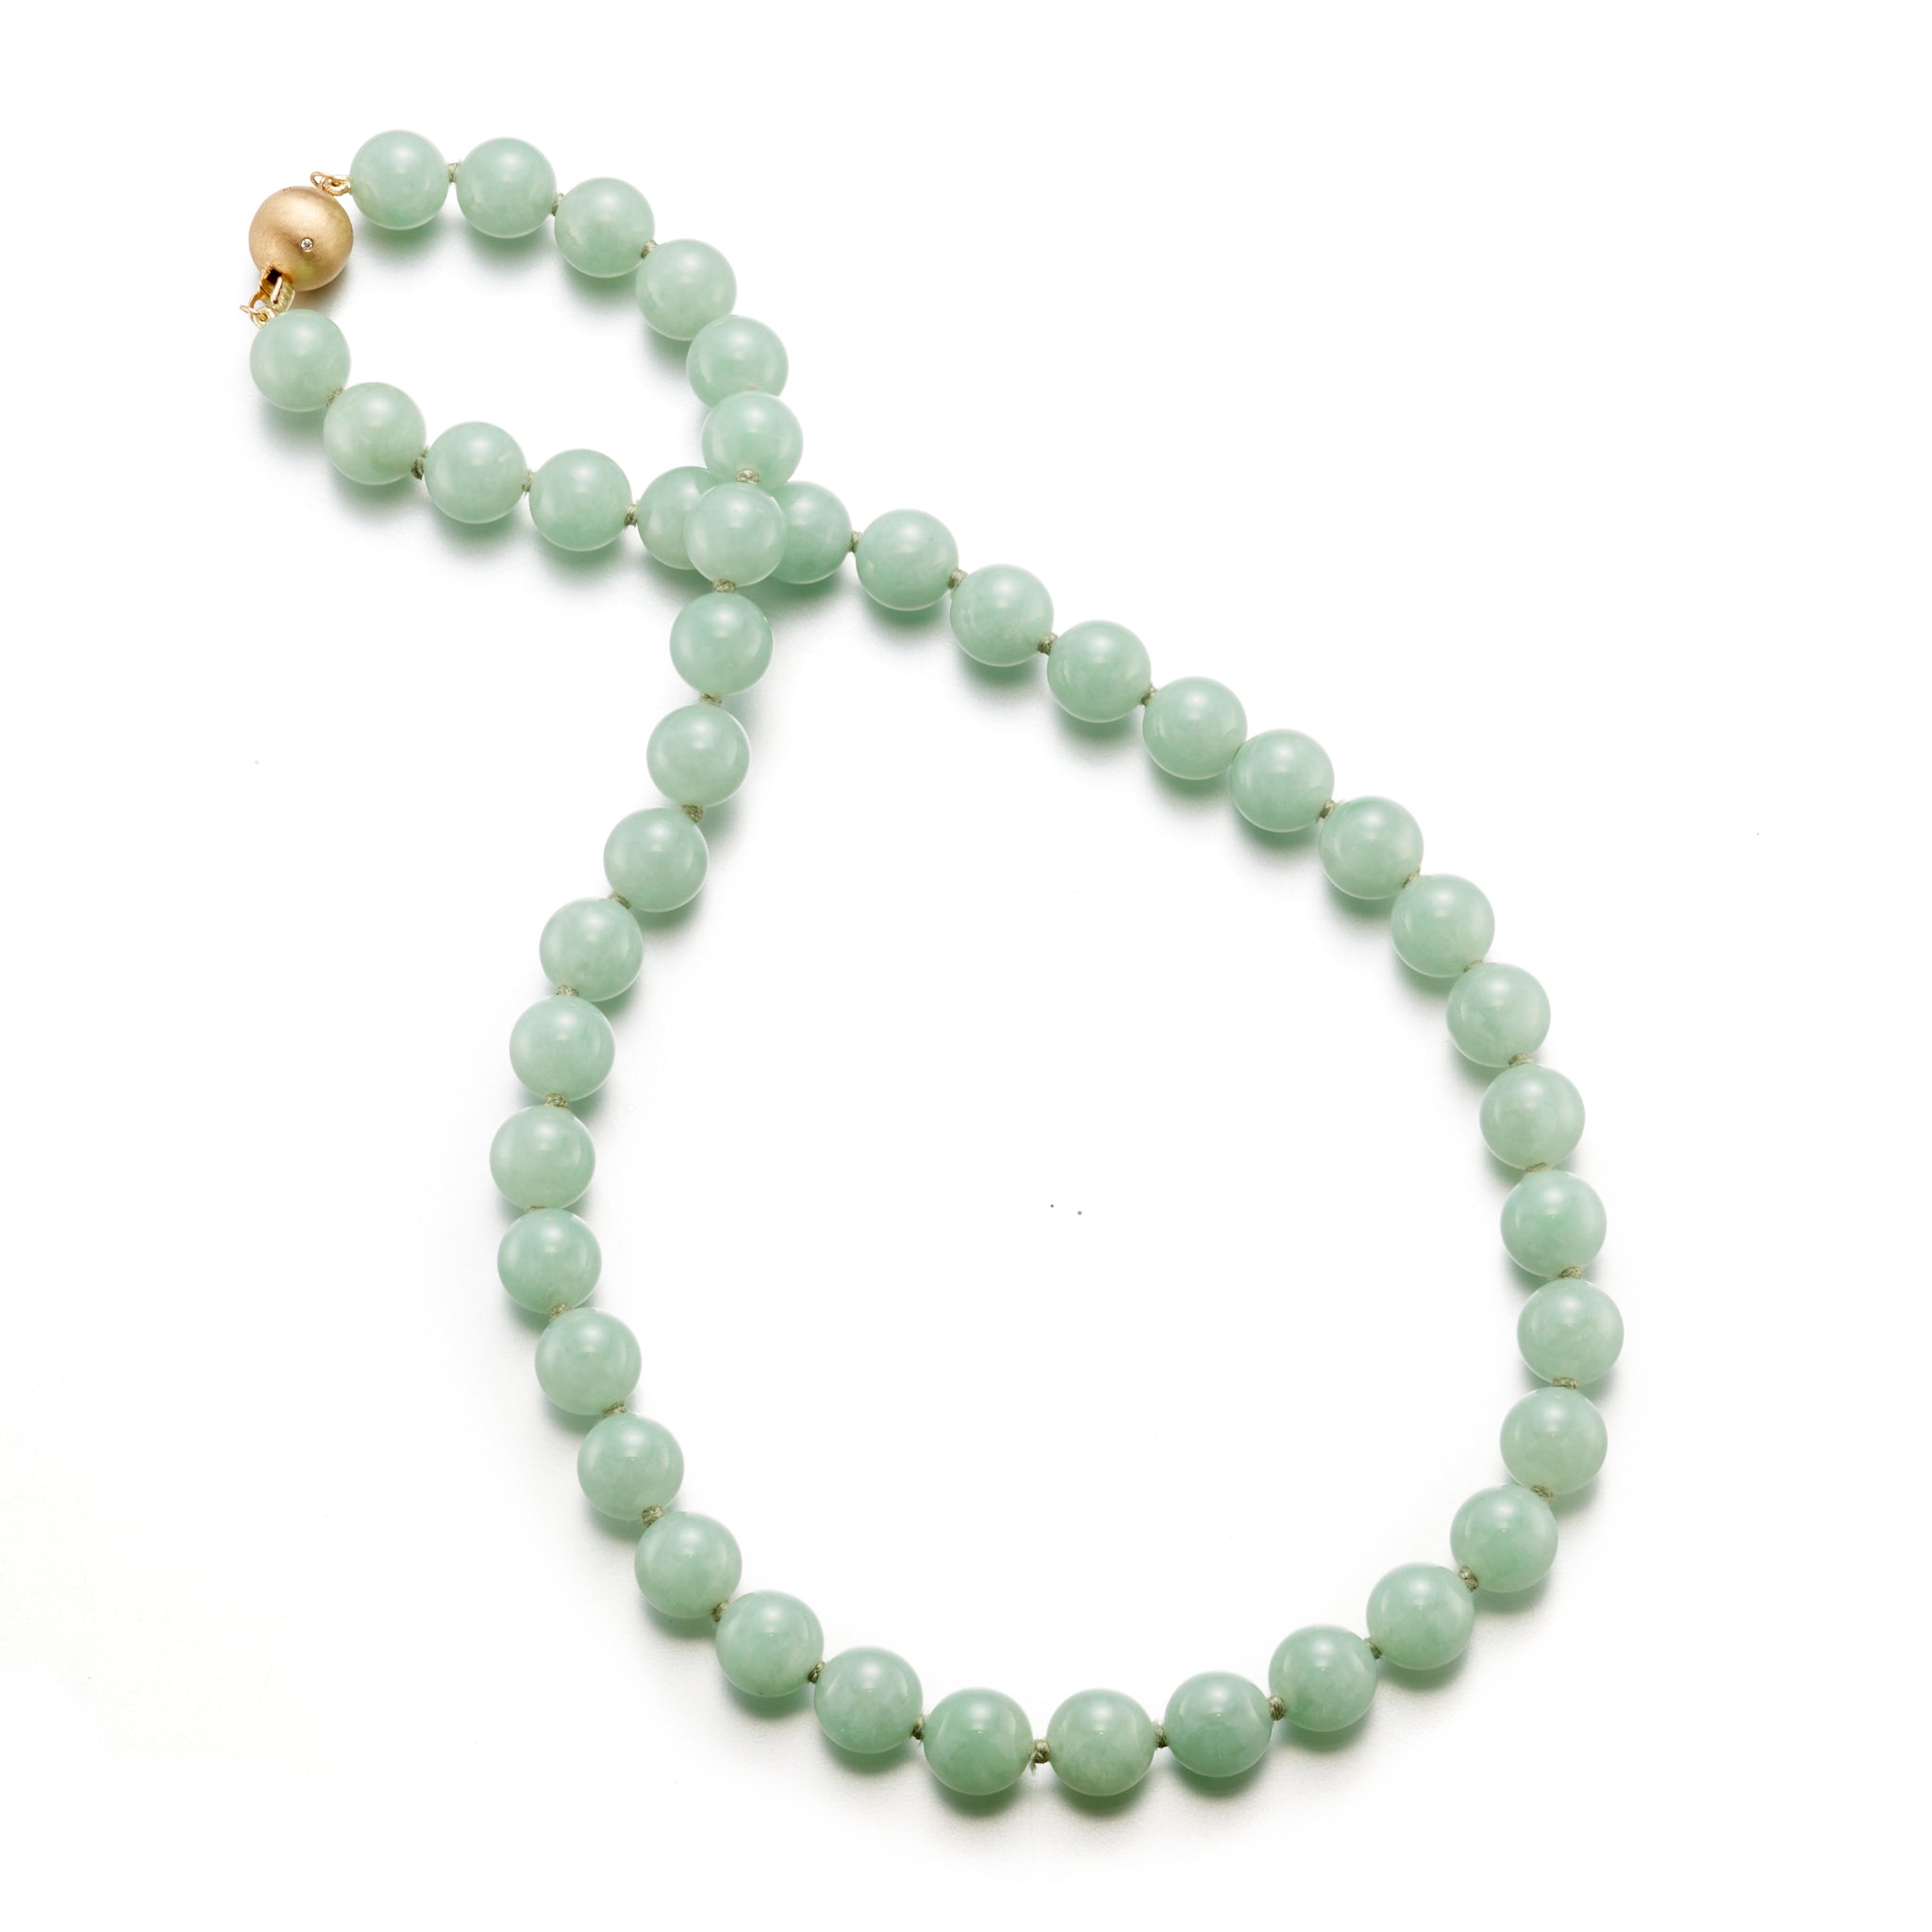 Translucent apple green beads(8.9-10.7mm) jadeite necklace - Nanyang Jade  –Authentic Jewellery Collection Singapore